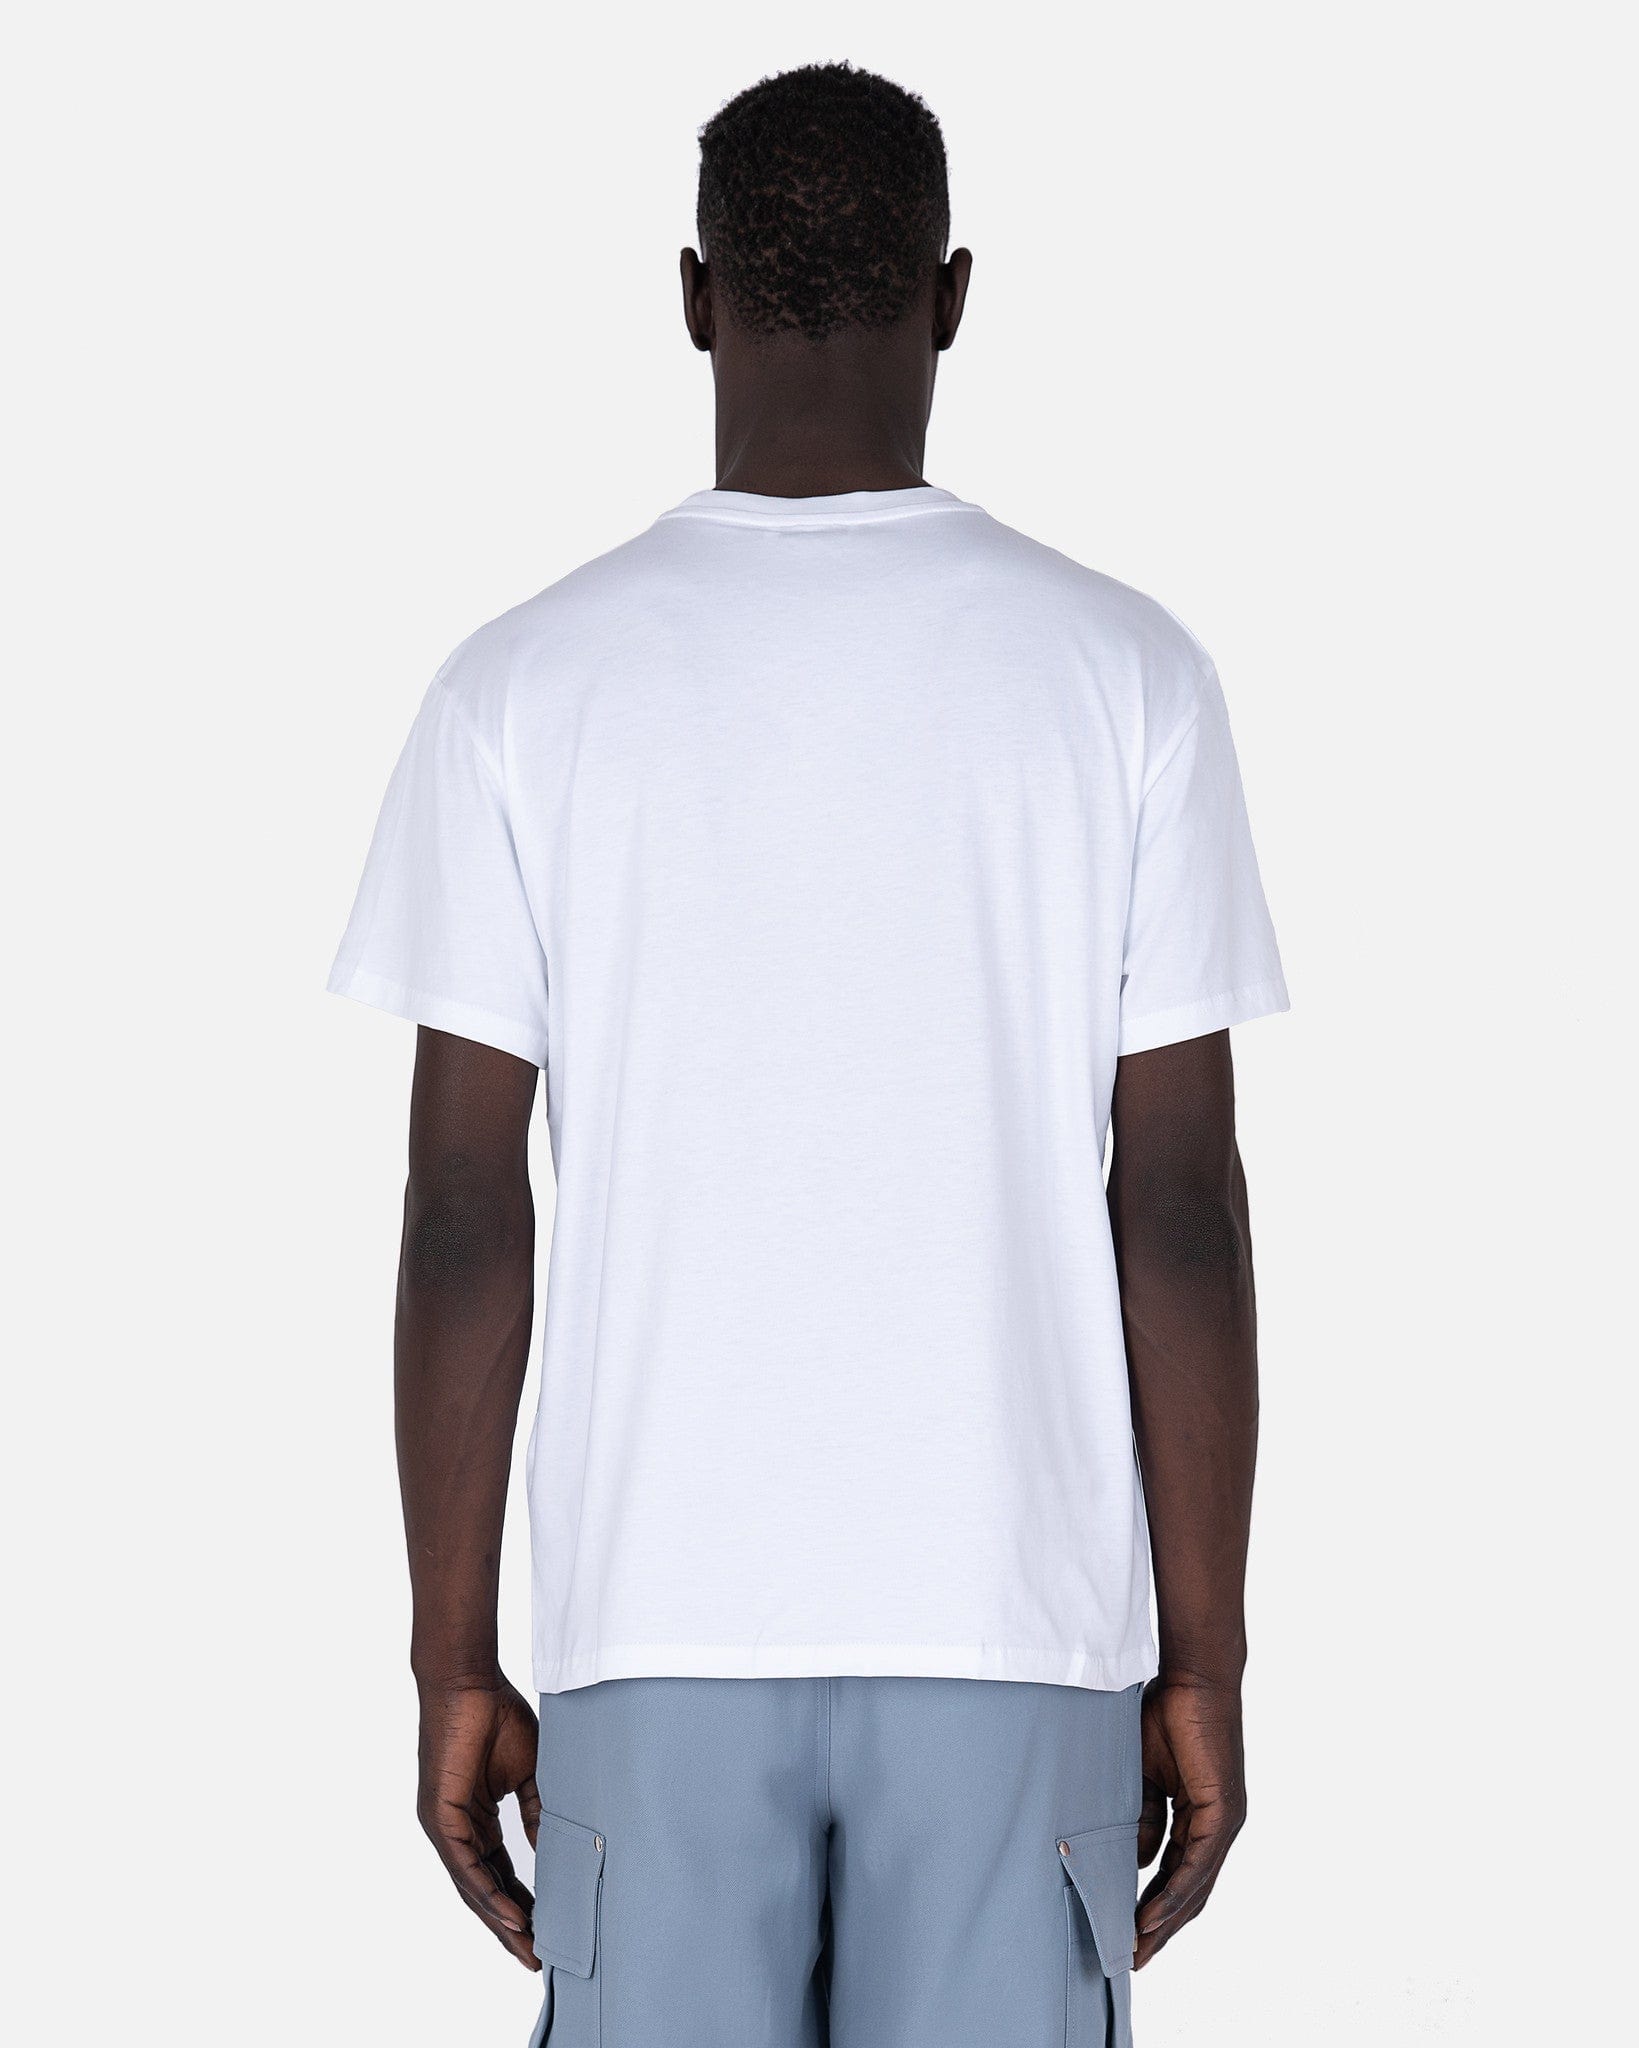 JW Anderson Men's T-Shirts Eye Embroidered Logo T-Shirt in White